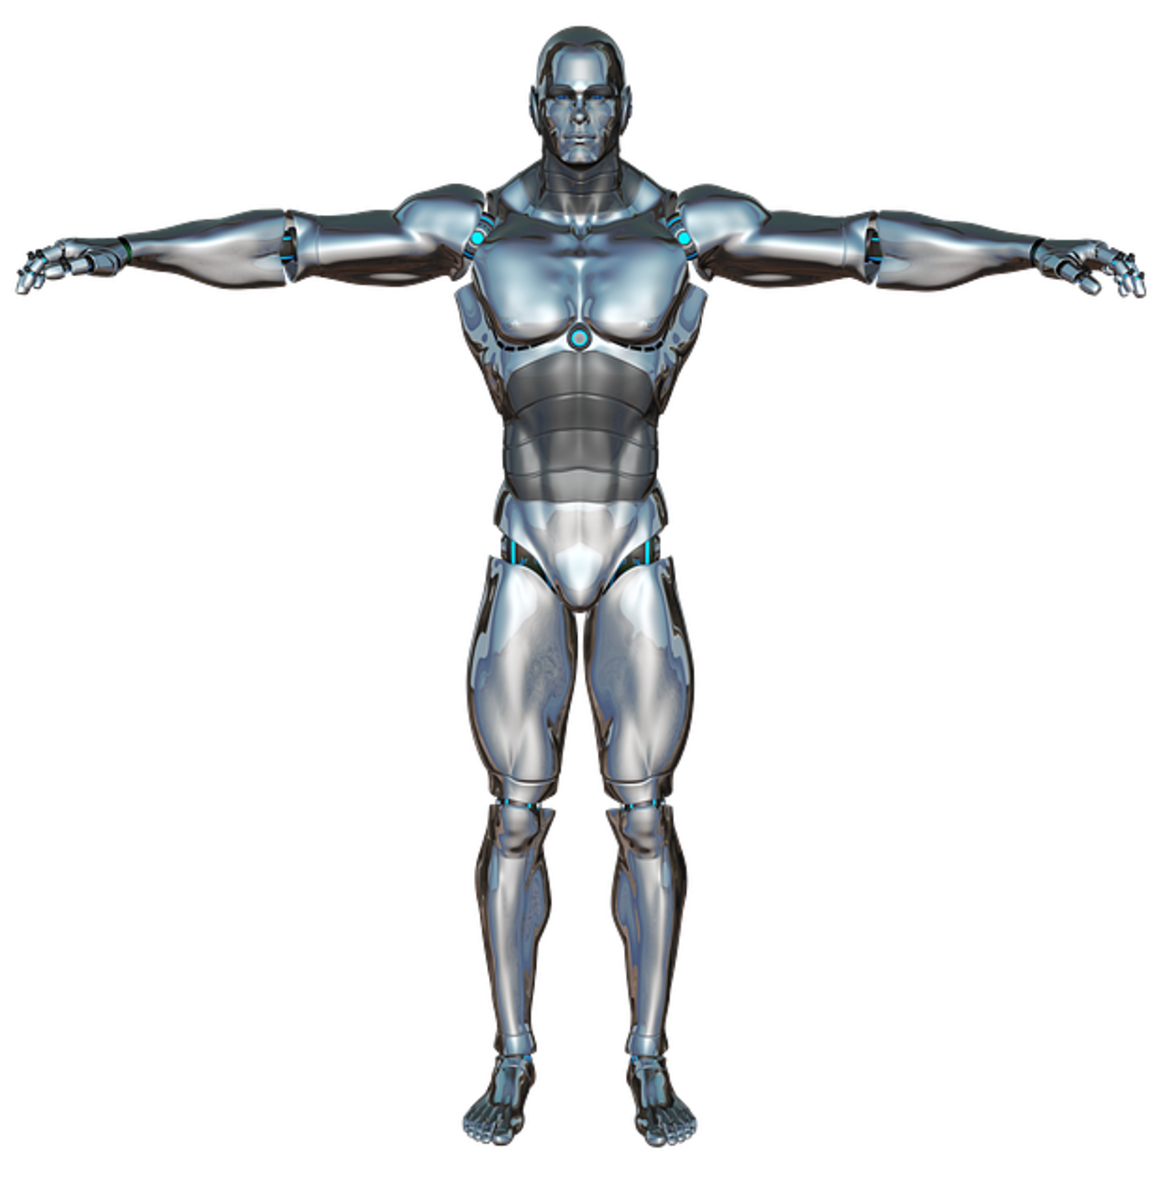 Turning Humans Into Robot Slaves Within The Next 100 Years (Biotechnology & Transhumanism)